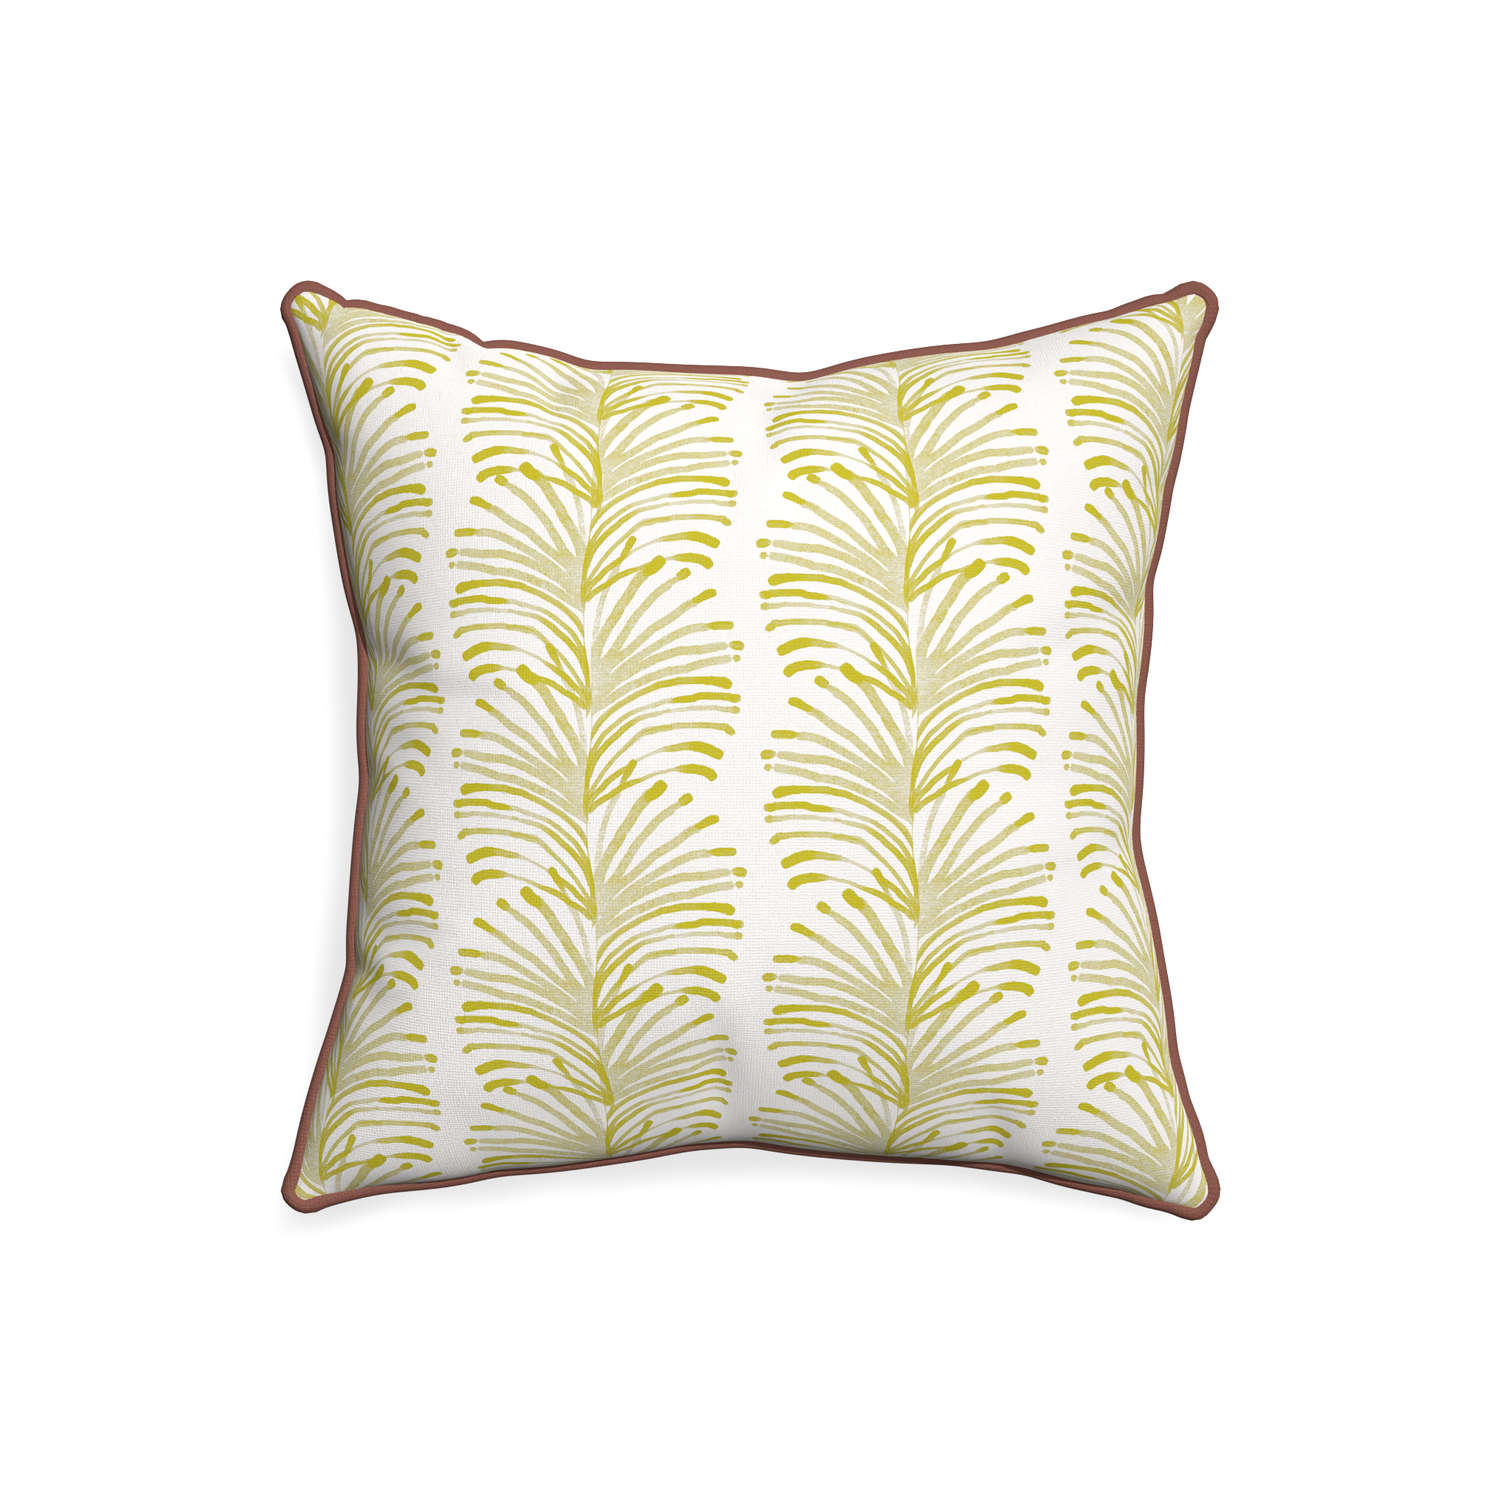 20-square emma chartreuse custom pillow with w piping on white background